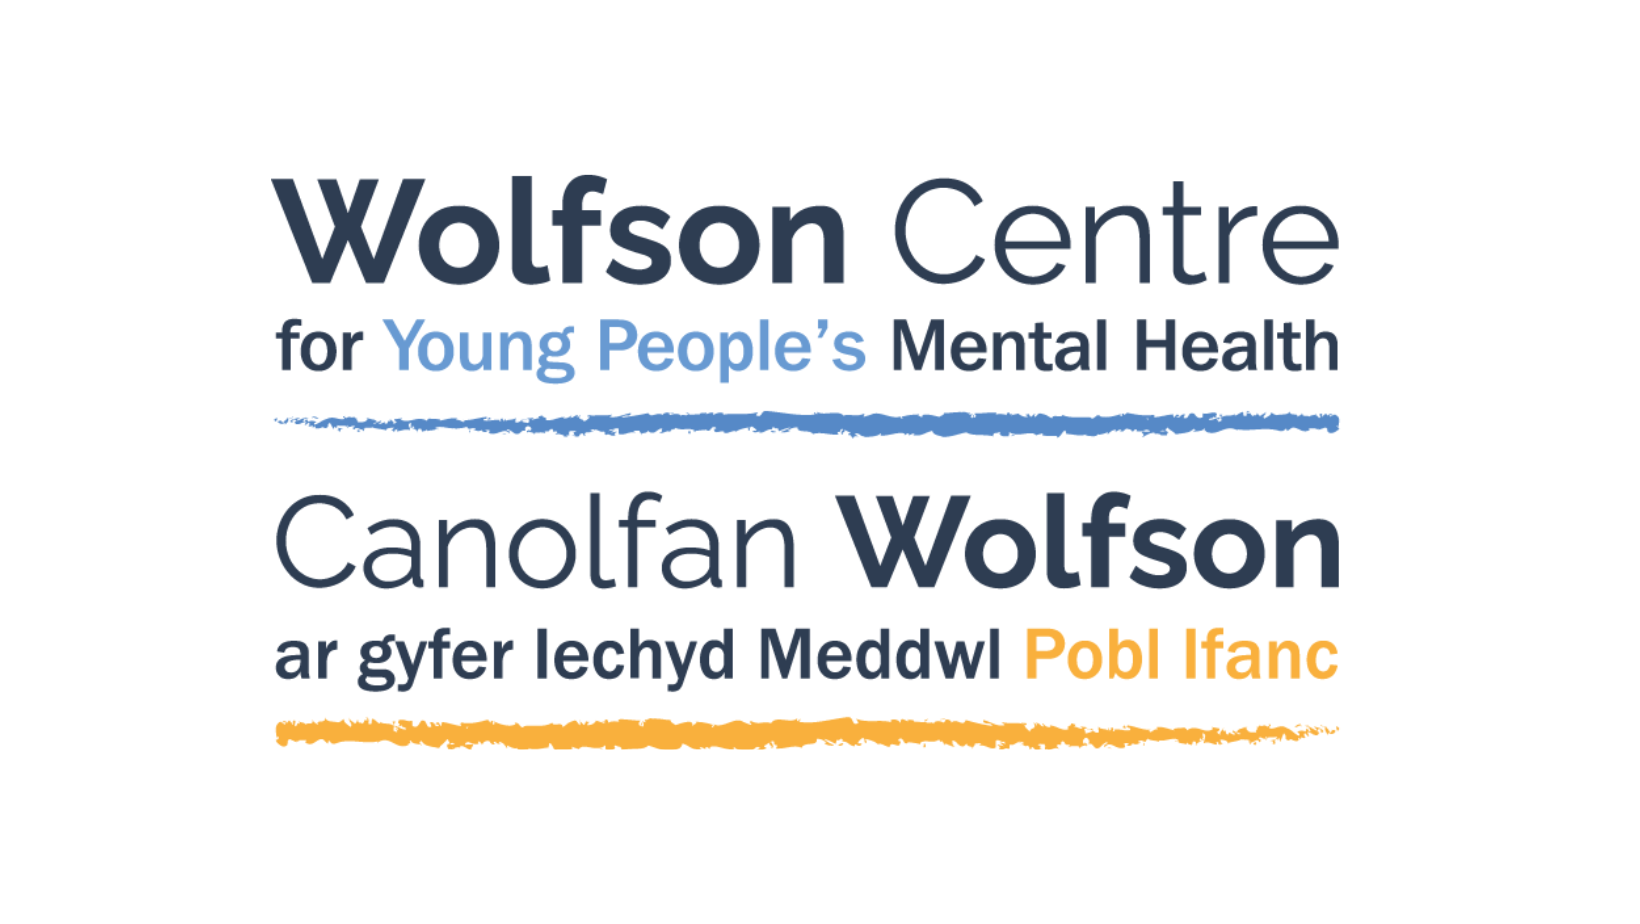 Wolfson Centre for Adolescent Mental Health in Wales